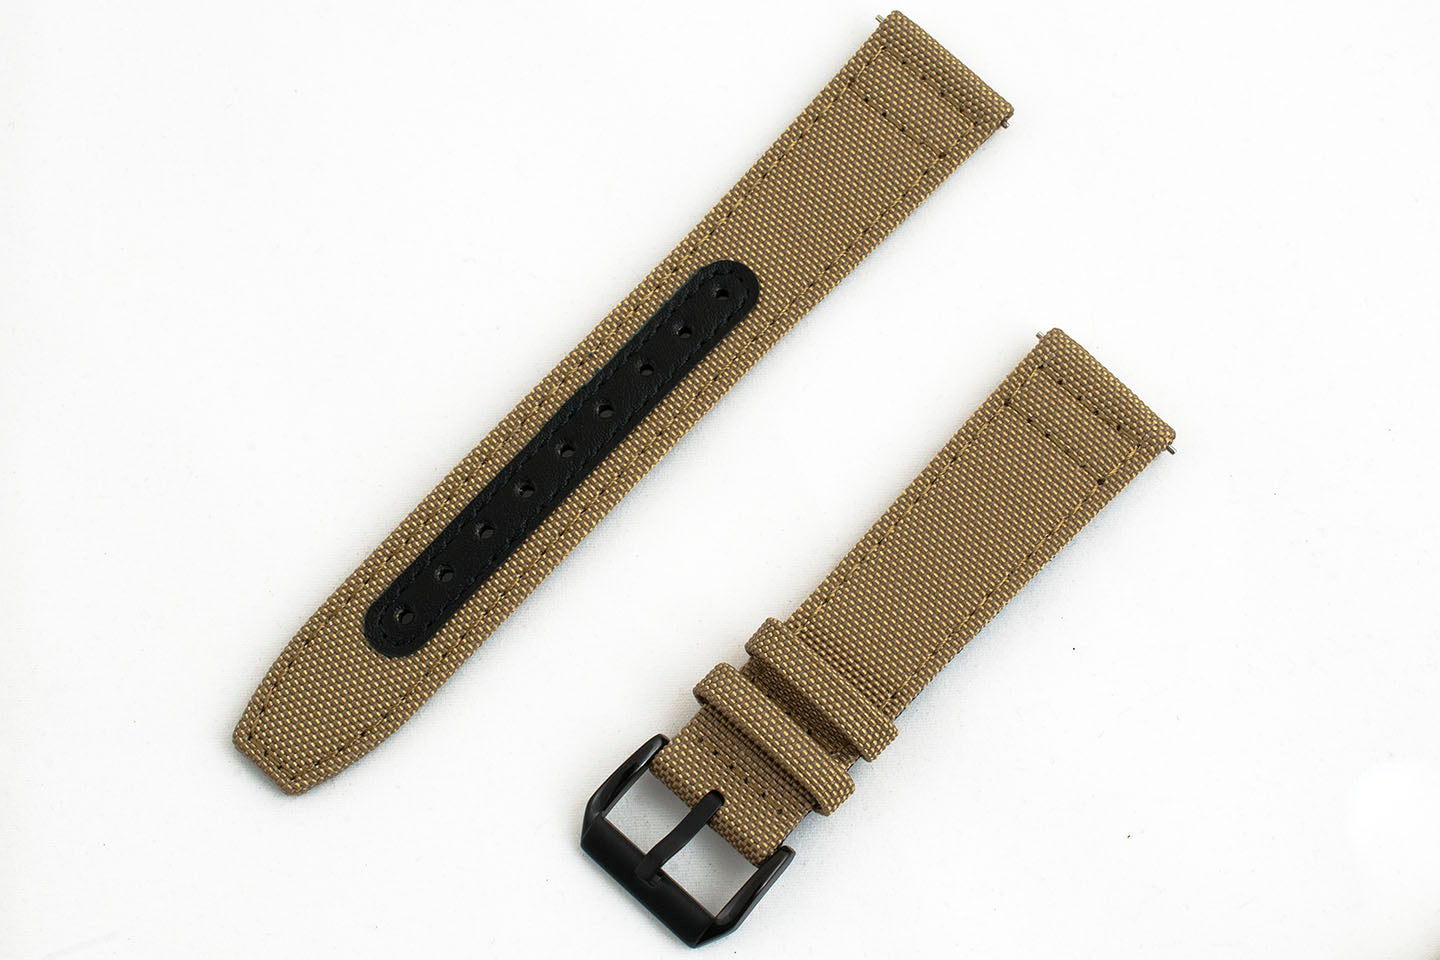 Premium Sailcloth quick release watch strap band replacement 19mm, 20mm, 21mm, 22mm khaki tan beige brown sand black pvd buckle